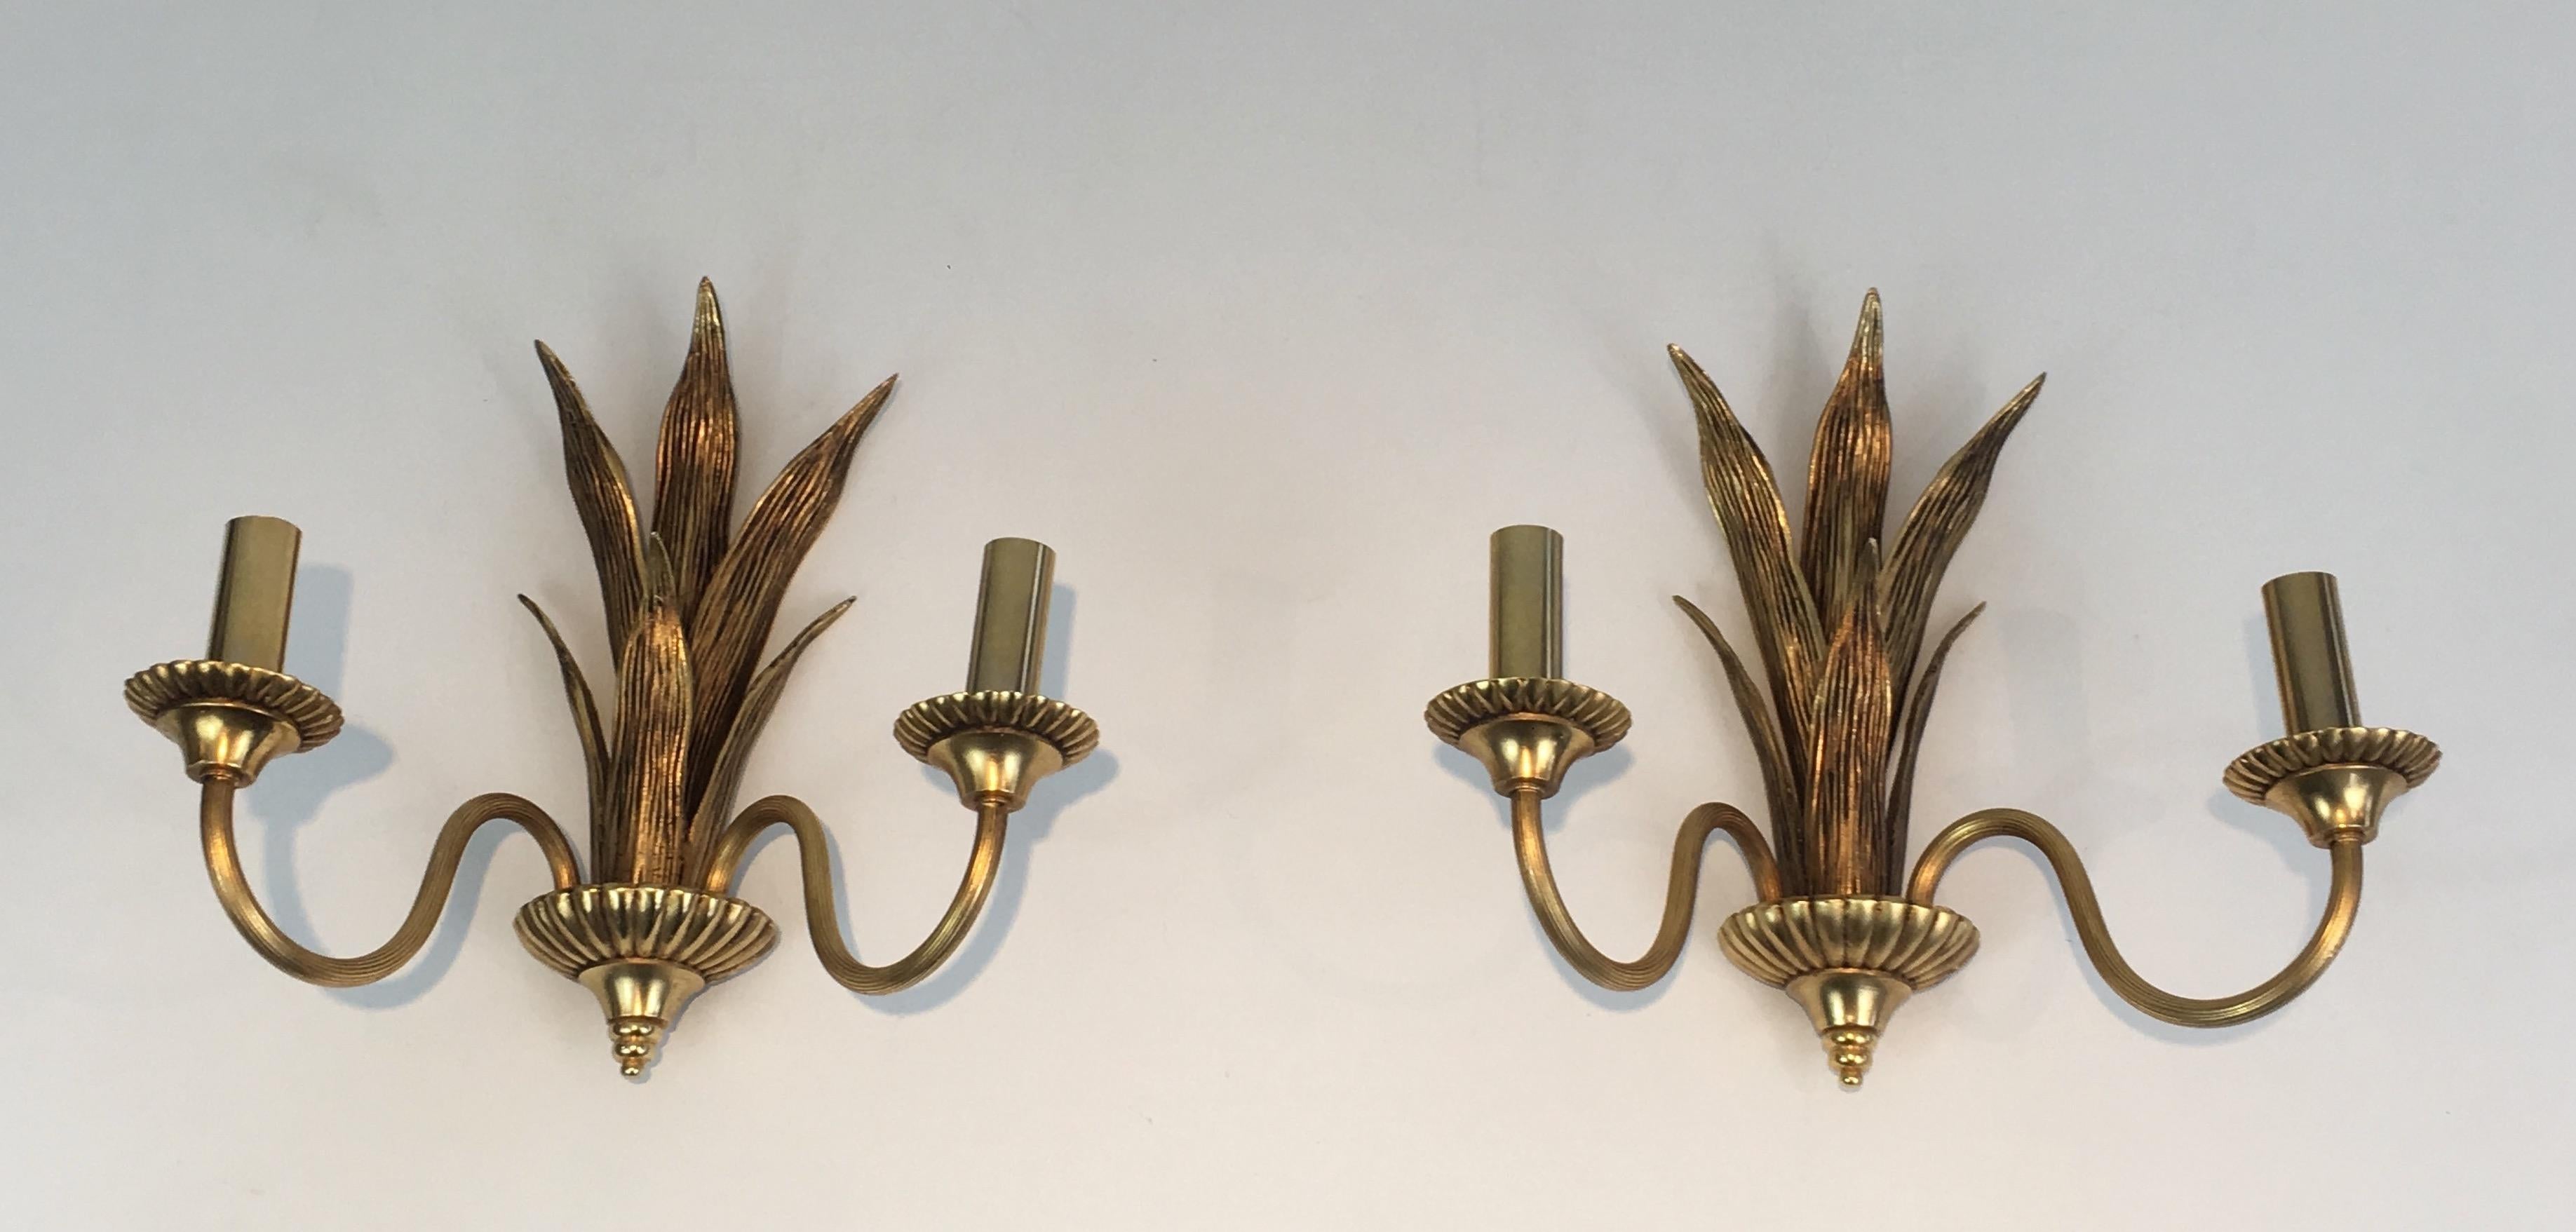 This pair of sconces is made of brass and bronze palm tree. These wall lights are very decorative and the quality is really good. This is a French work in the style of famous French designer Maison Charles, circa 1970.